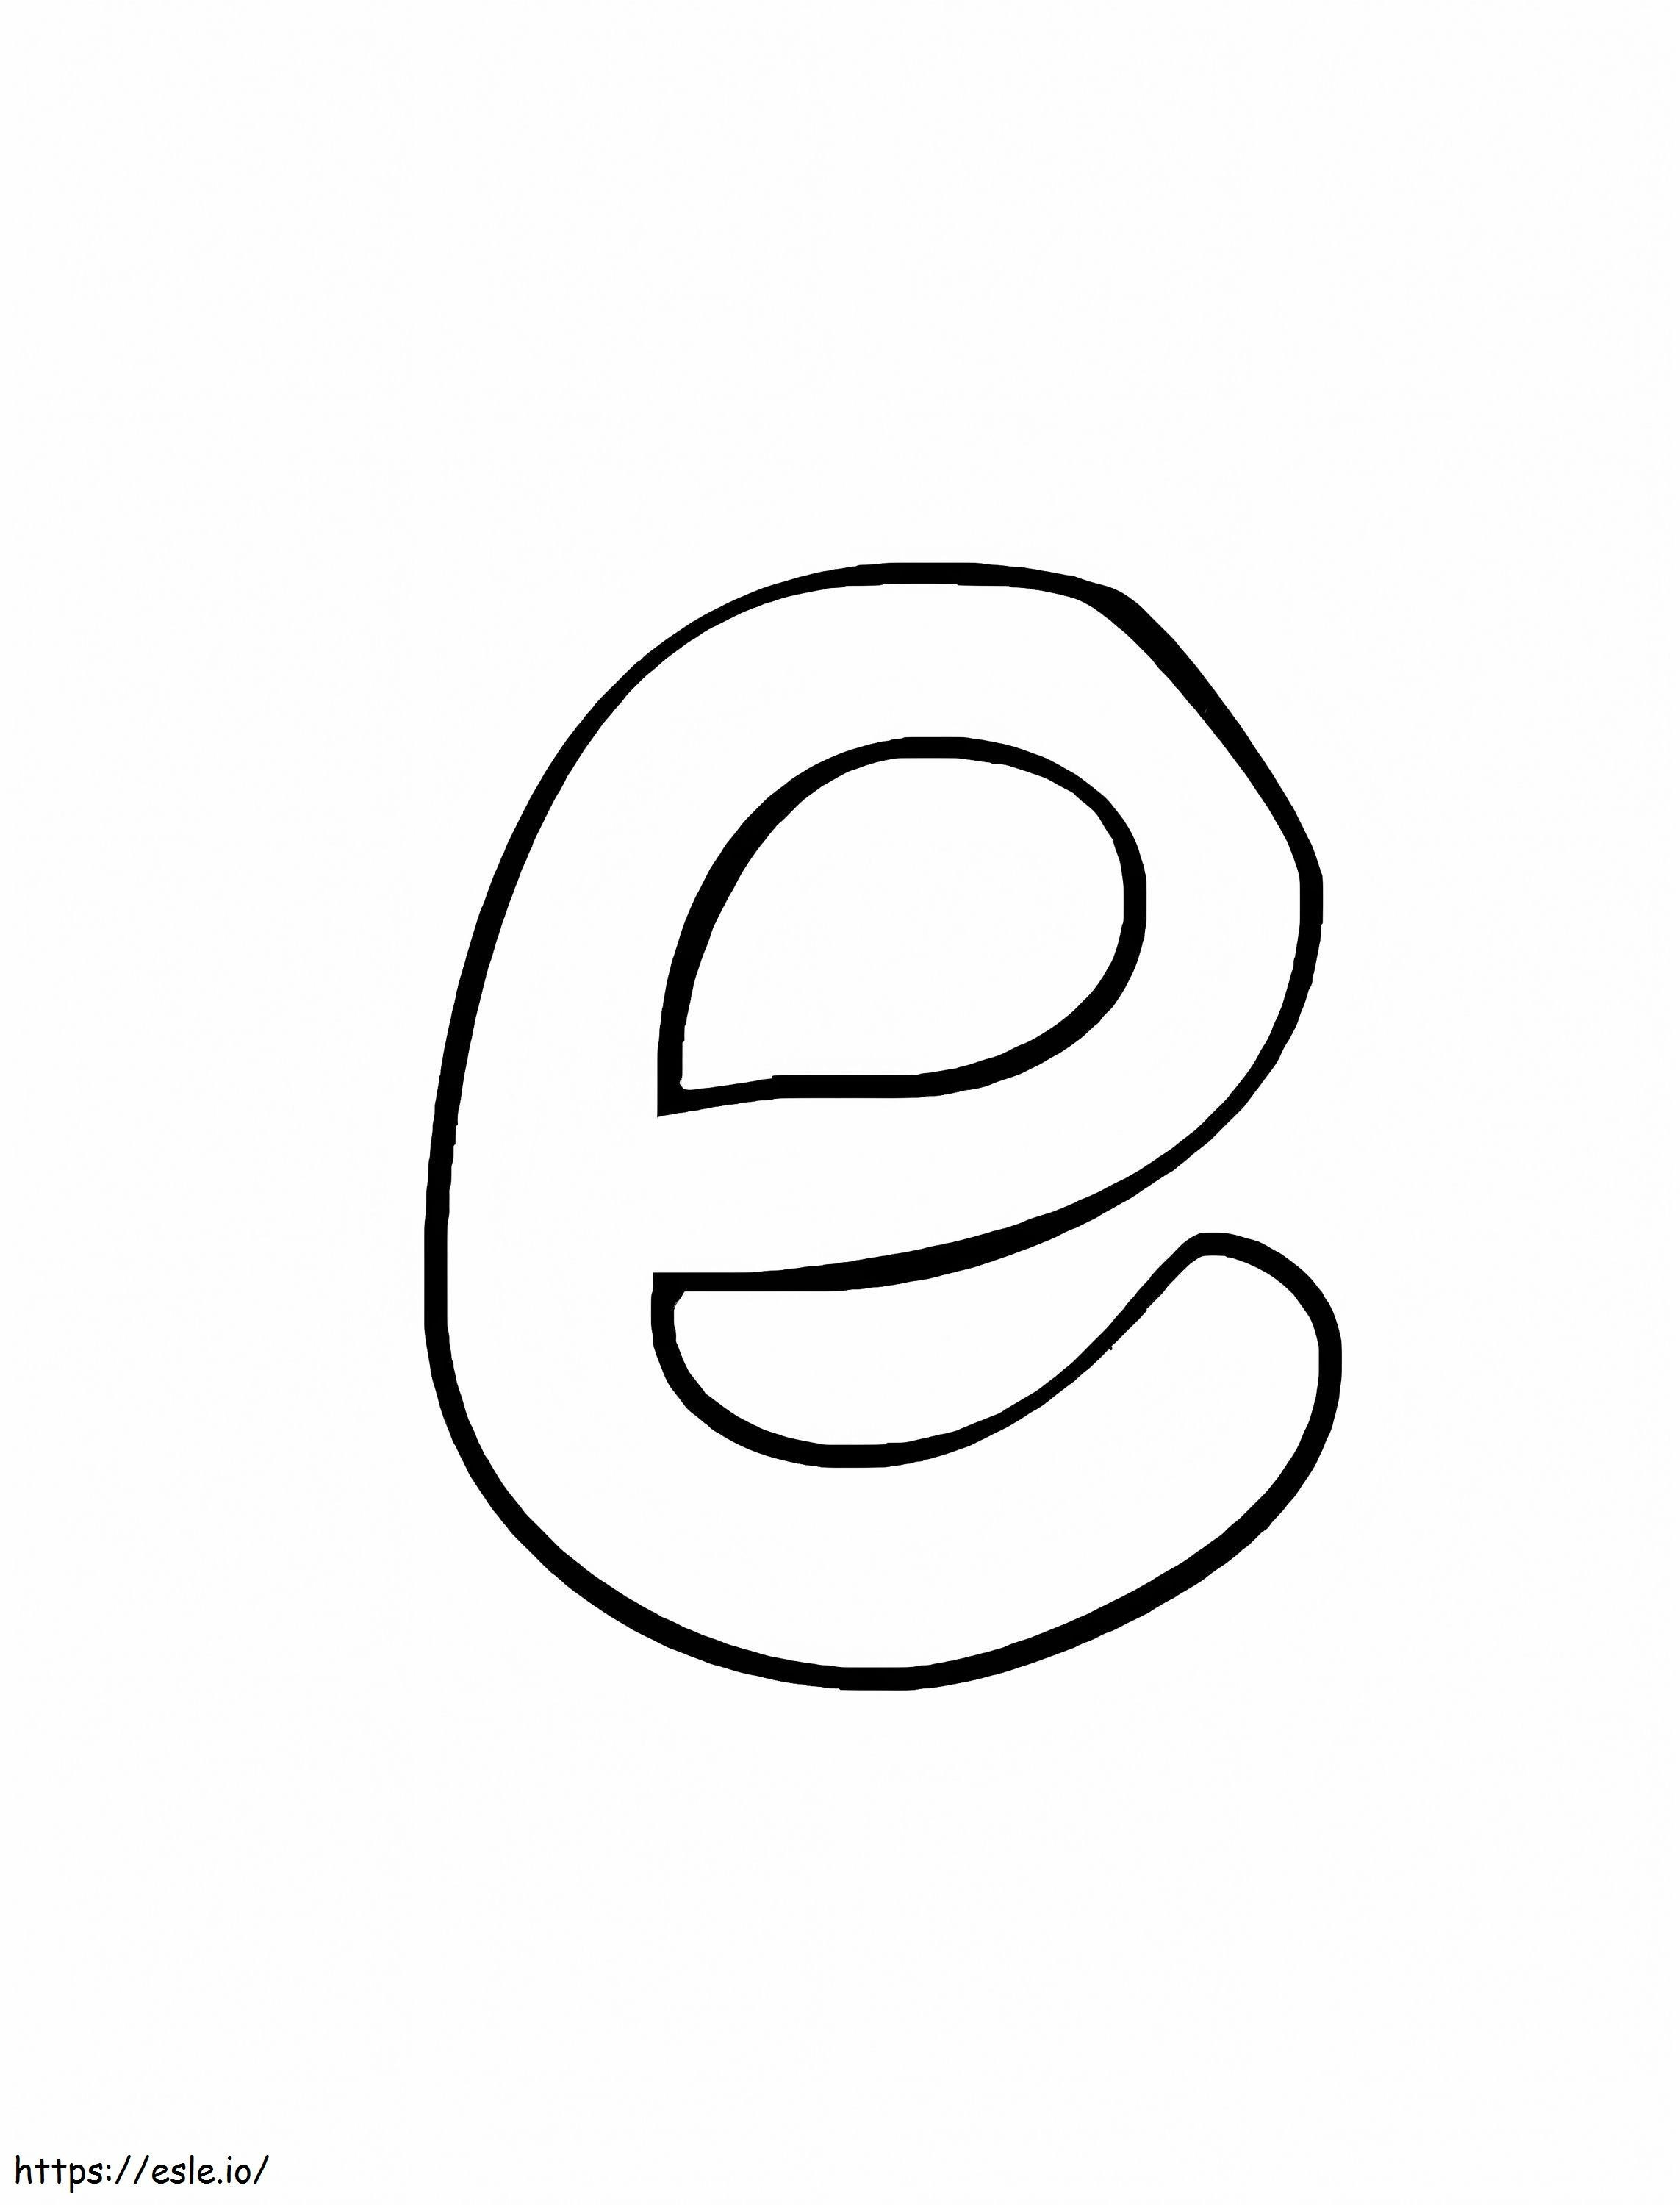 Letter E 1 coloring page